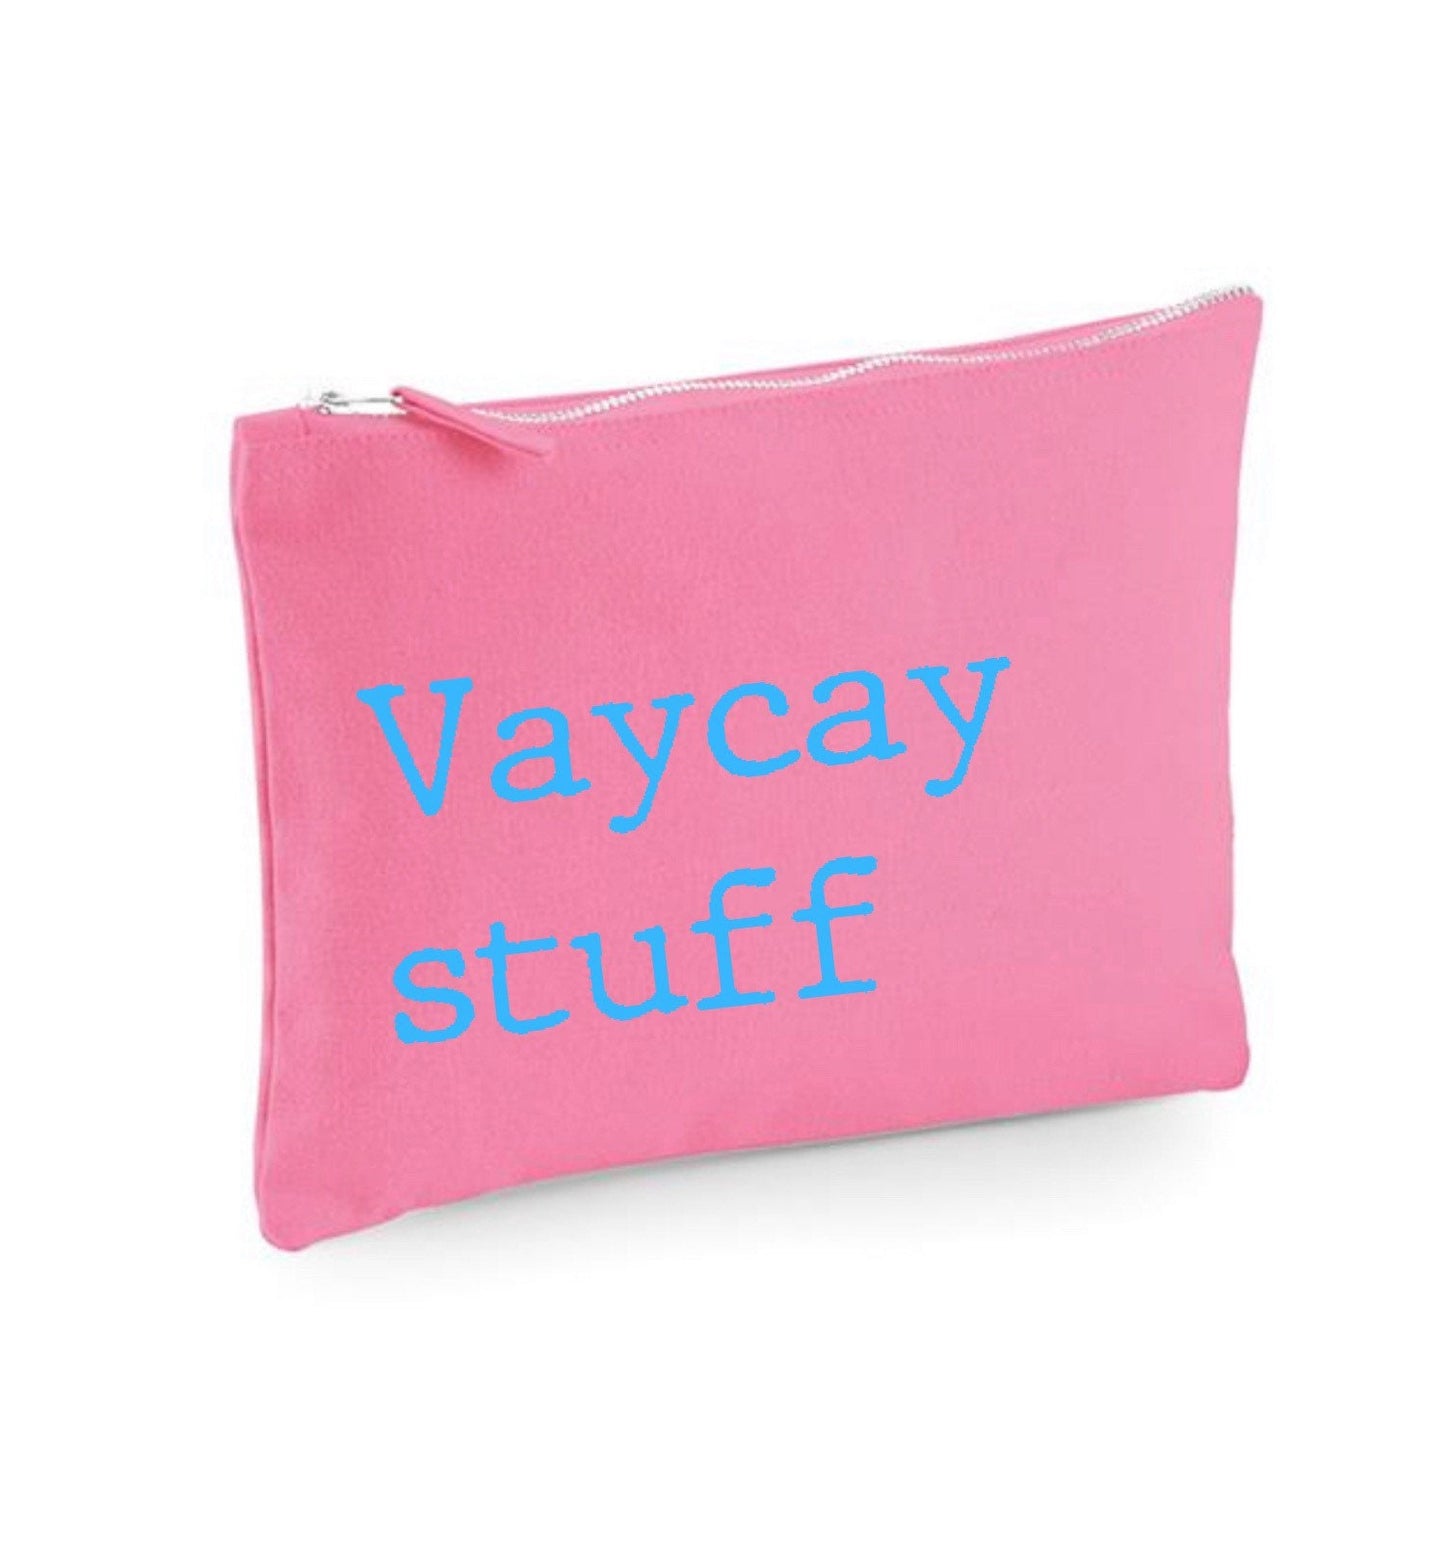 Vaycay stuff, suitcase packing bag, personalised travel essentials pouch, in flight bag, cabin bag organiser